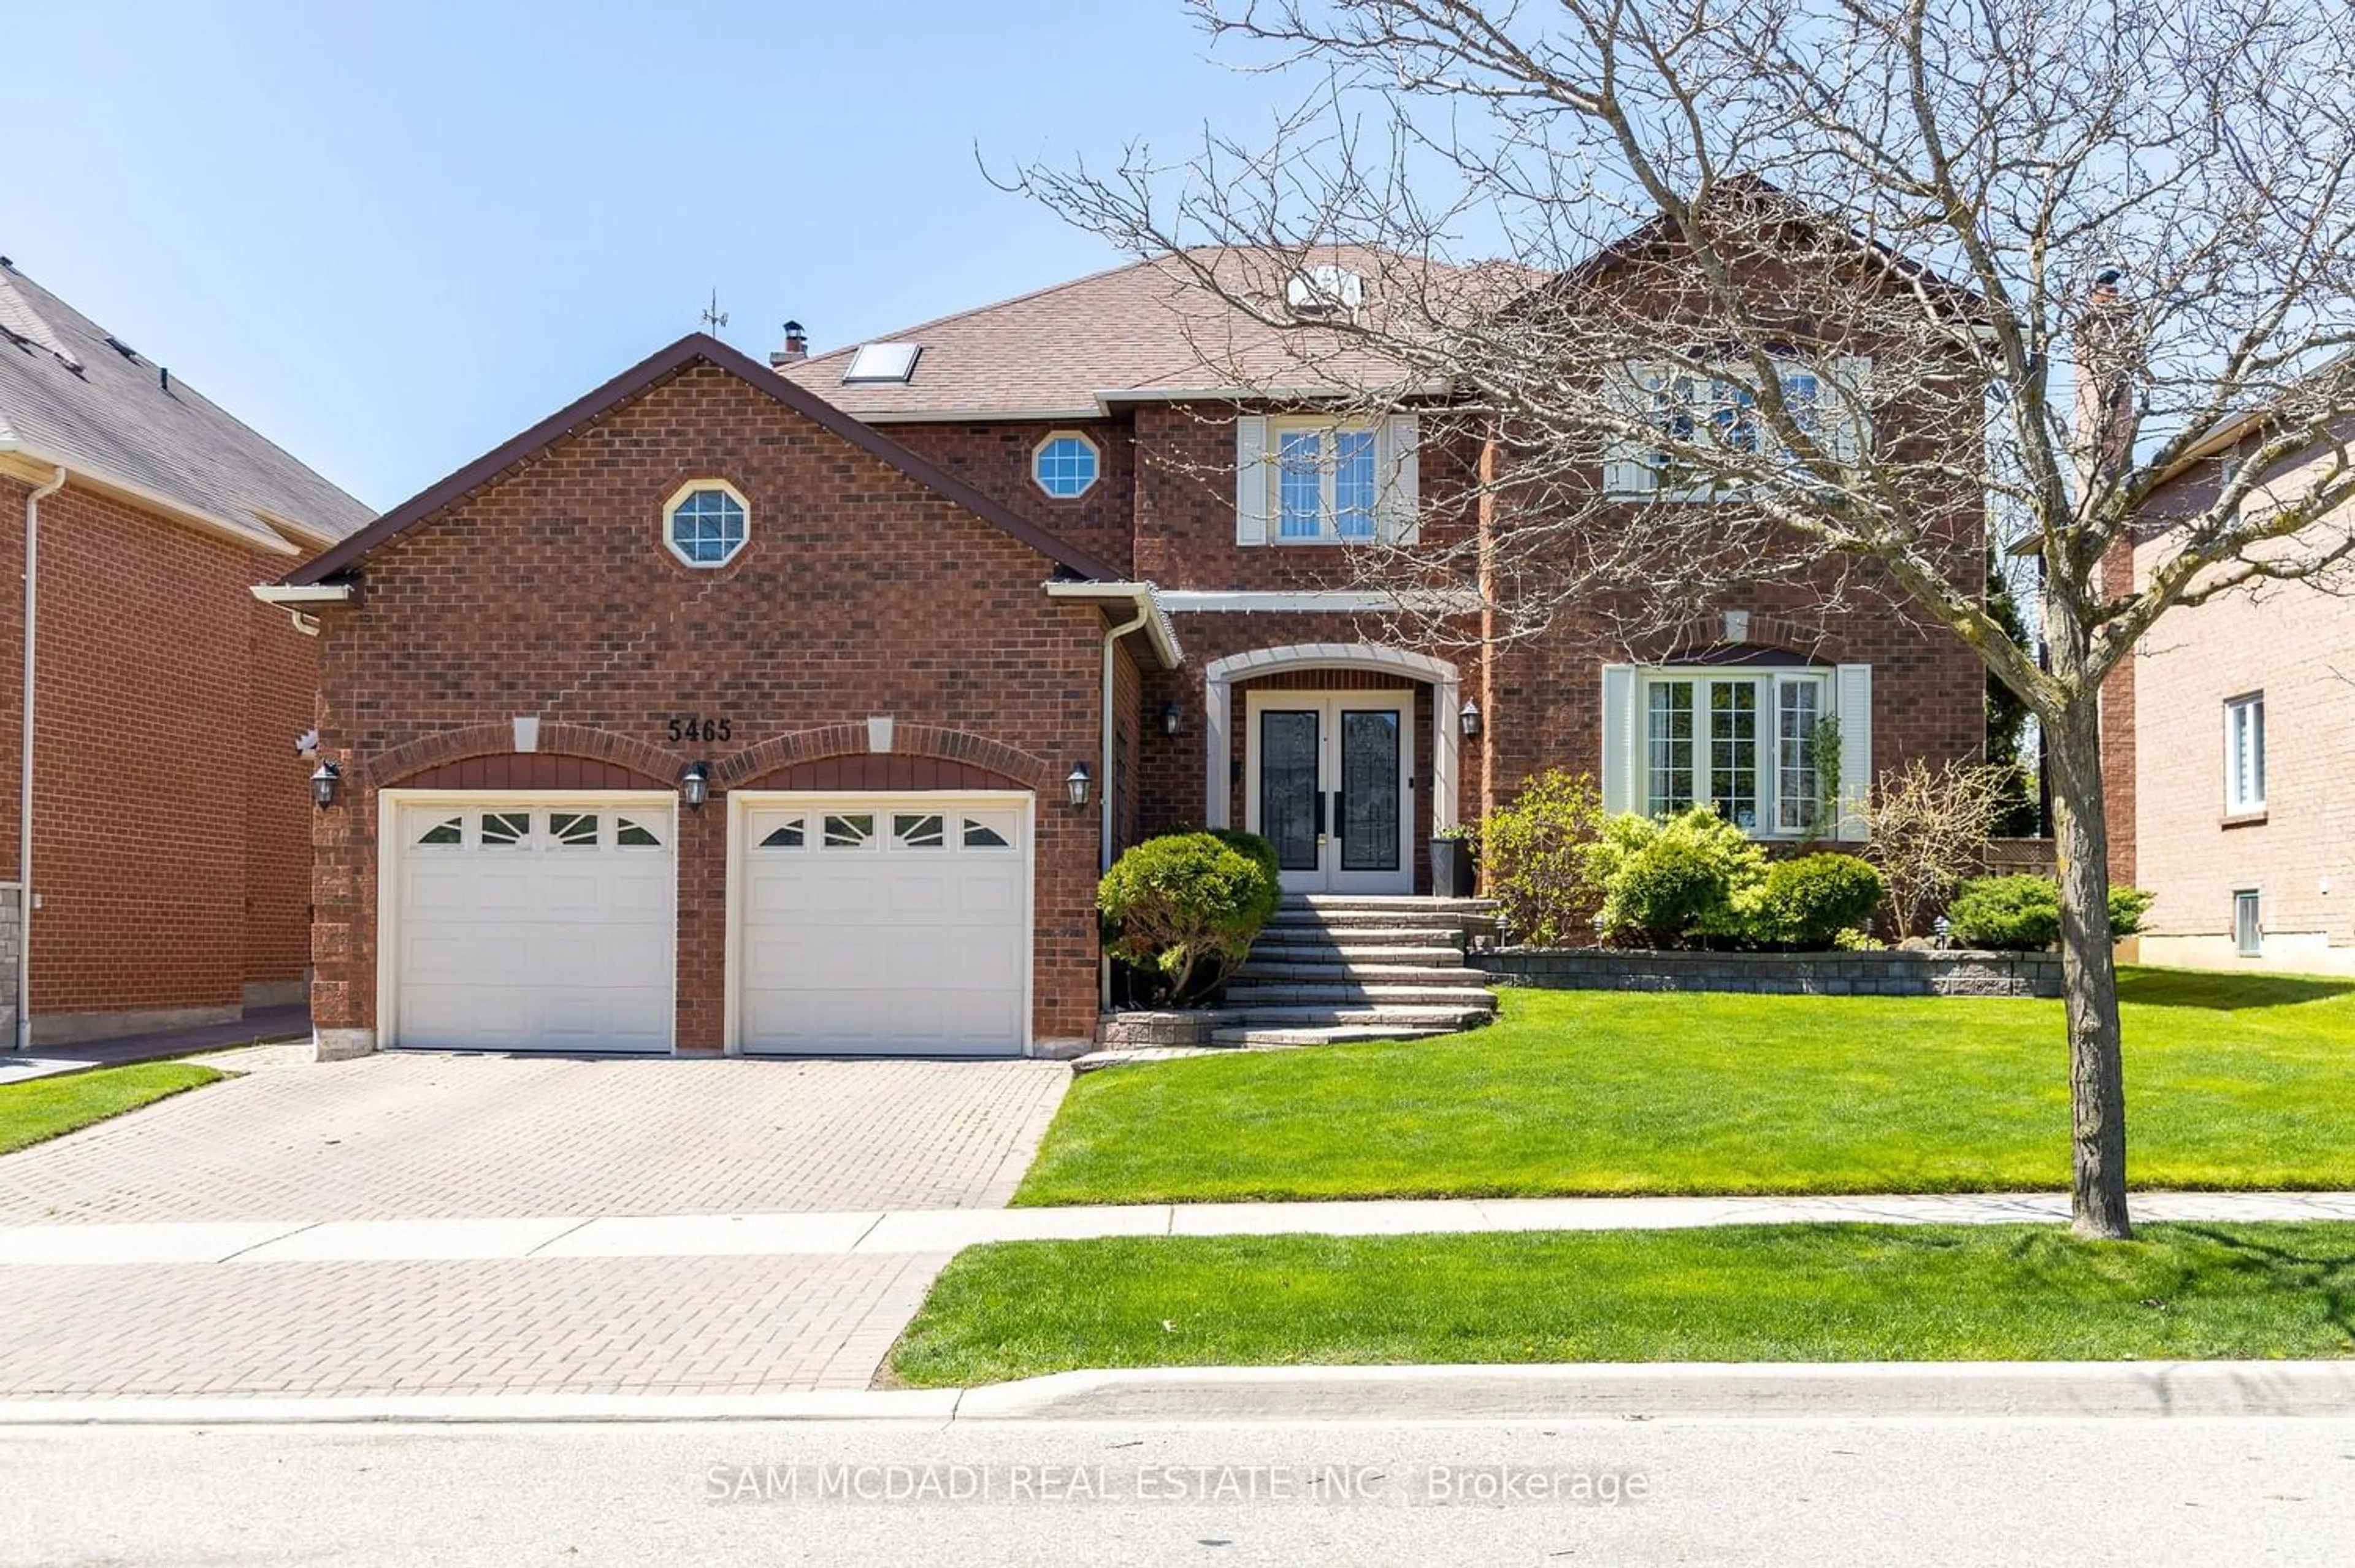 Home with brick exterior material for 5465 Shorecrest Cres, Mississauga Ontario L5M 4Y6